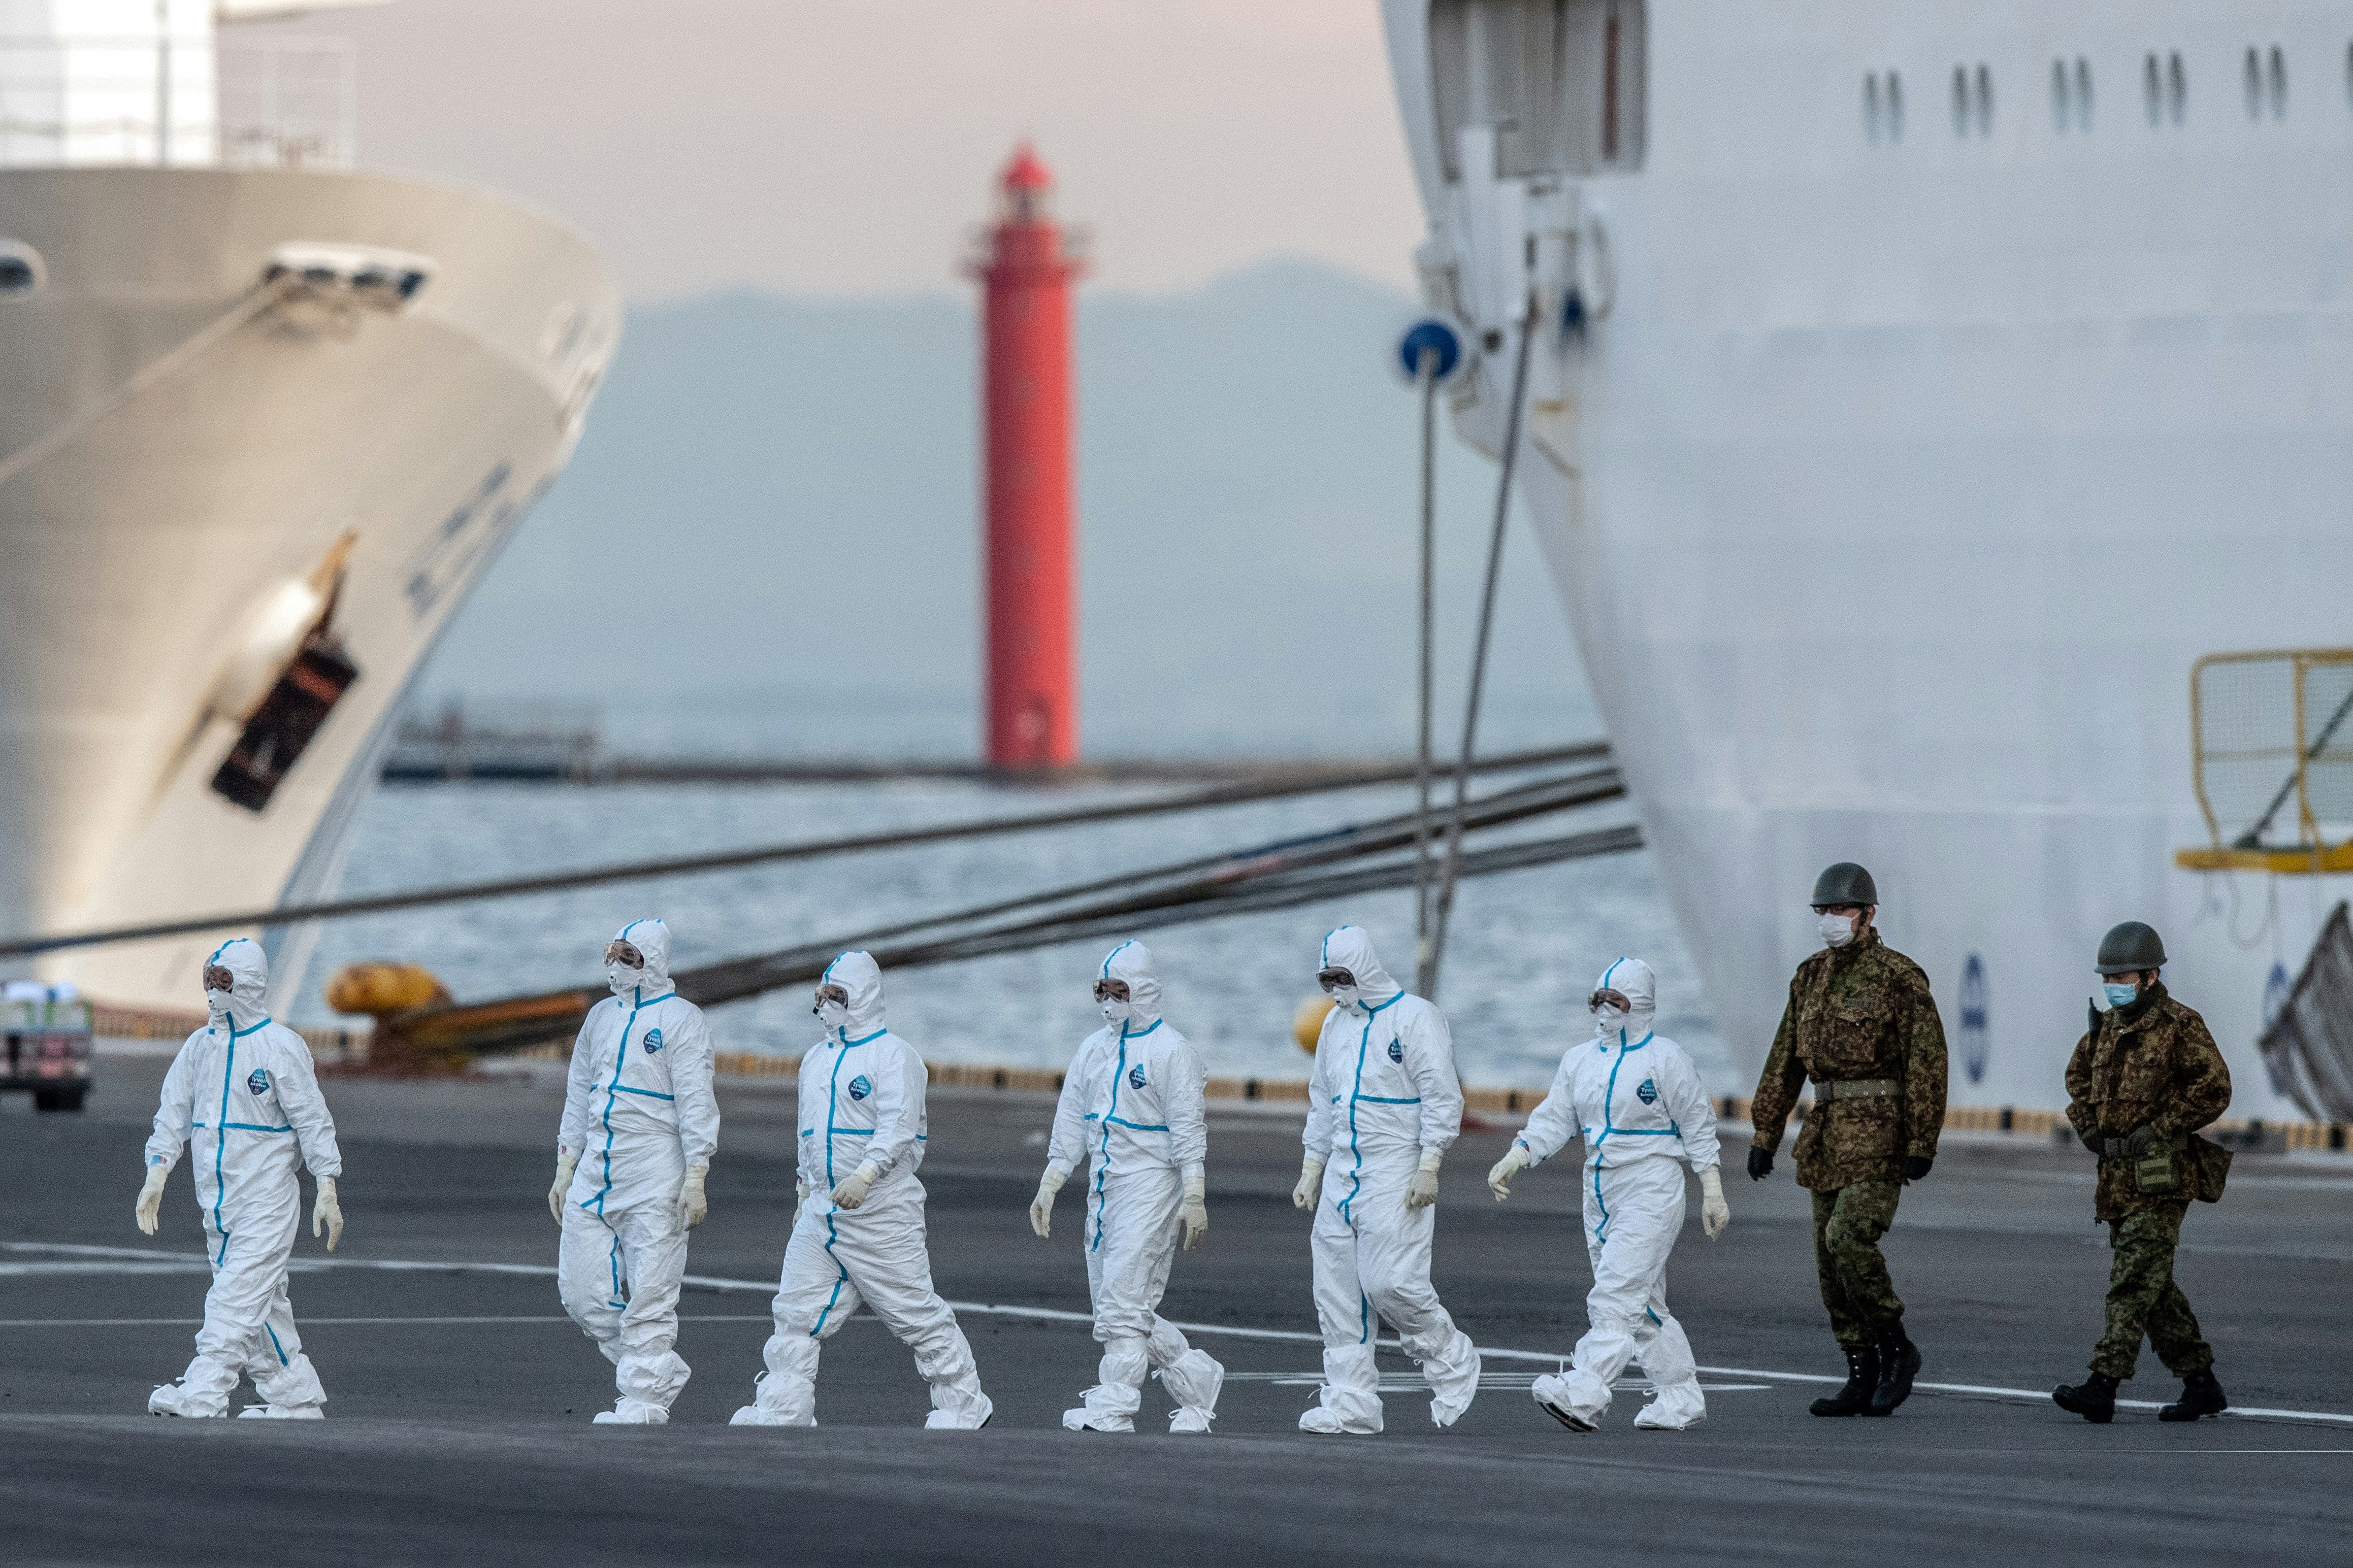 People in protective suits walk away from a cruise ship.